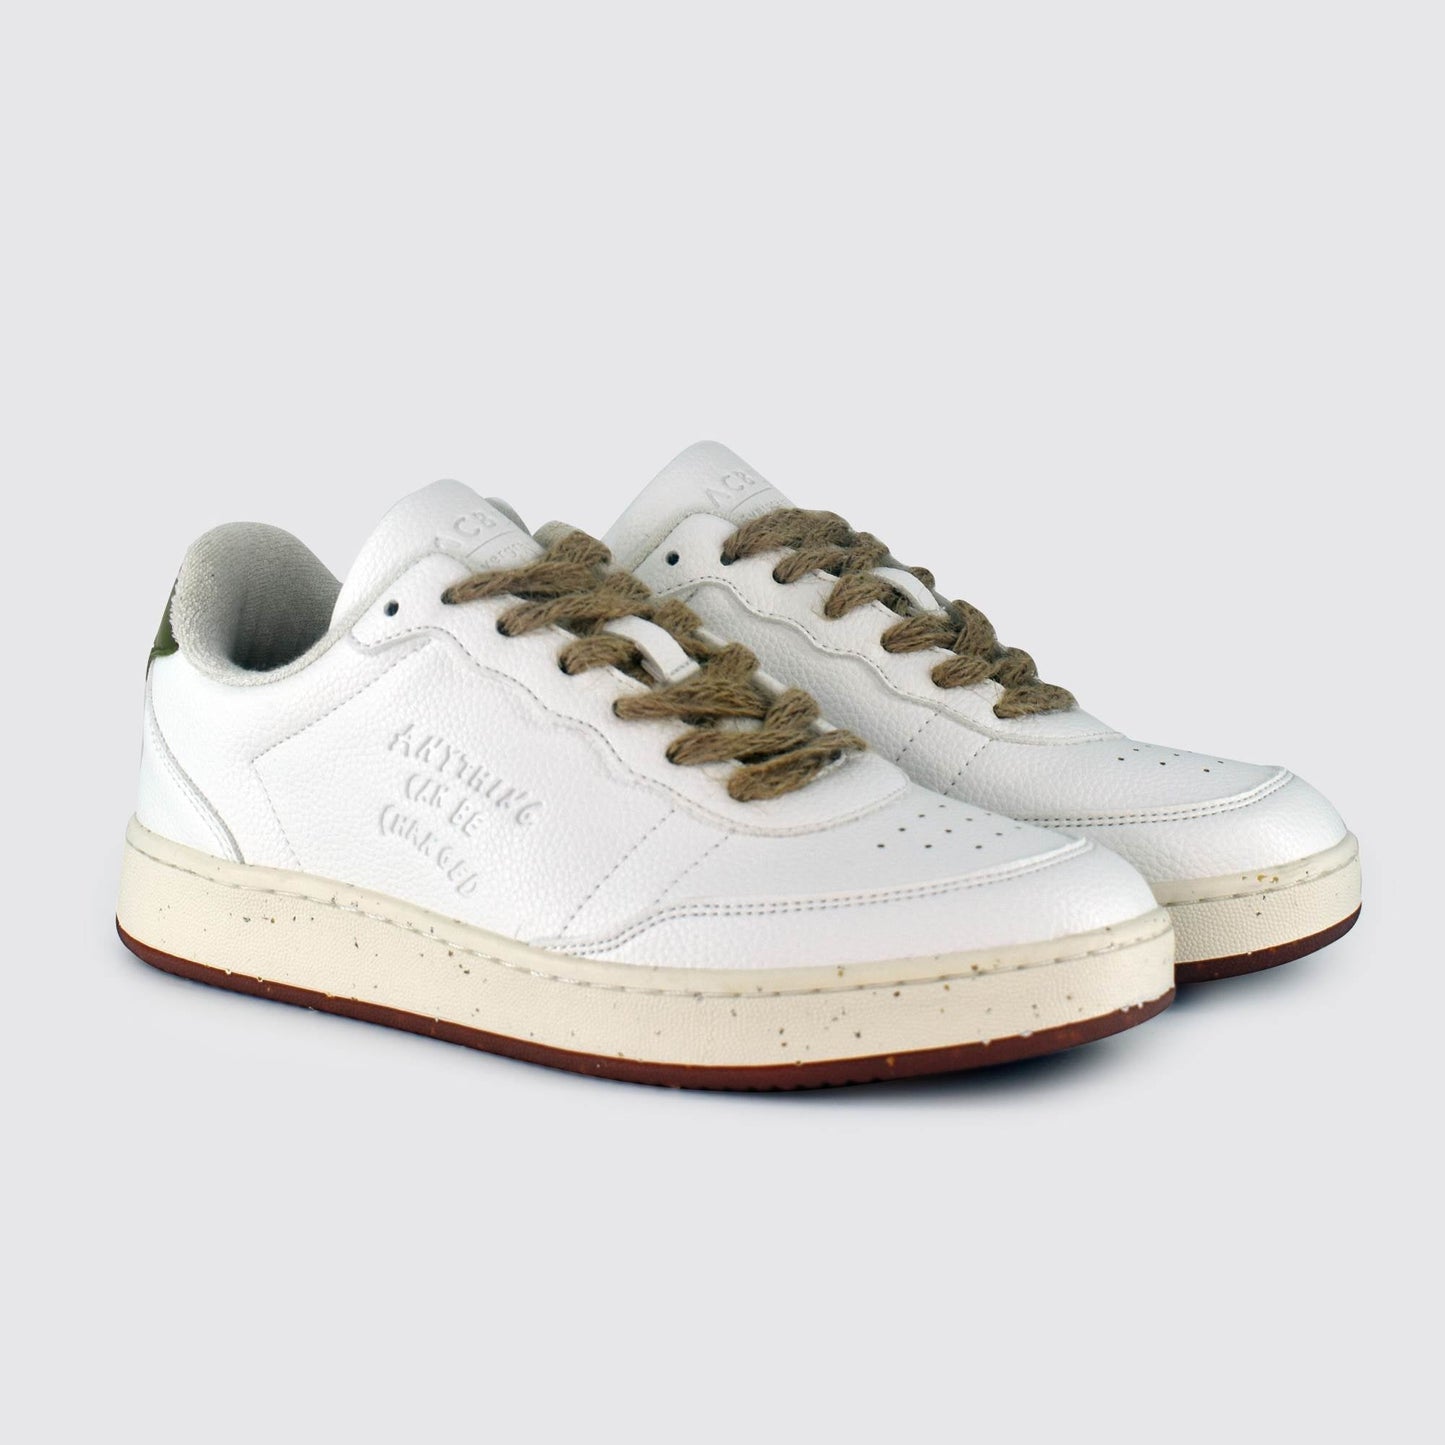 New - Evergreen White Green Cactus Shoes